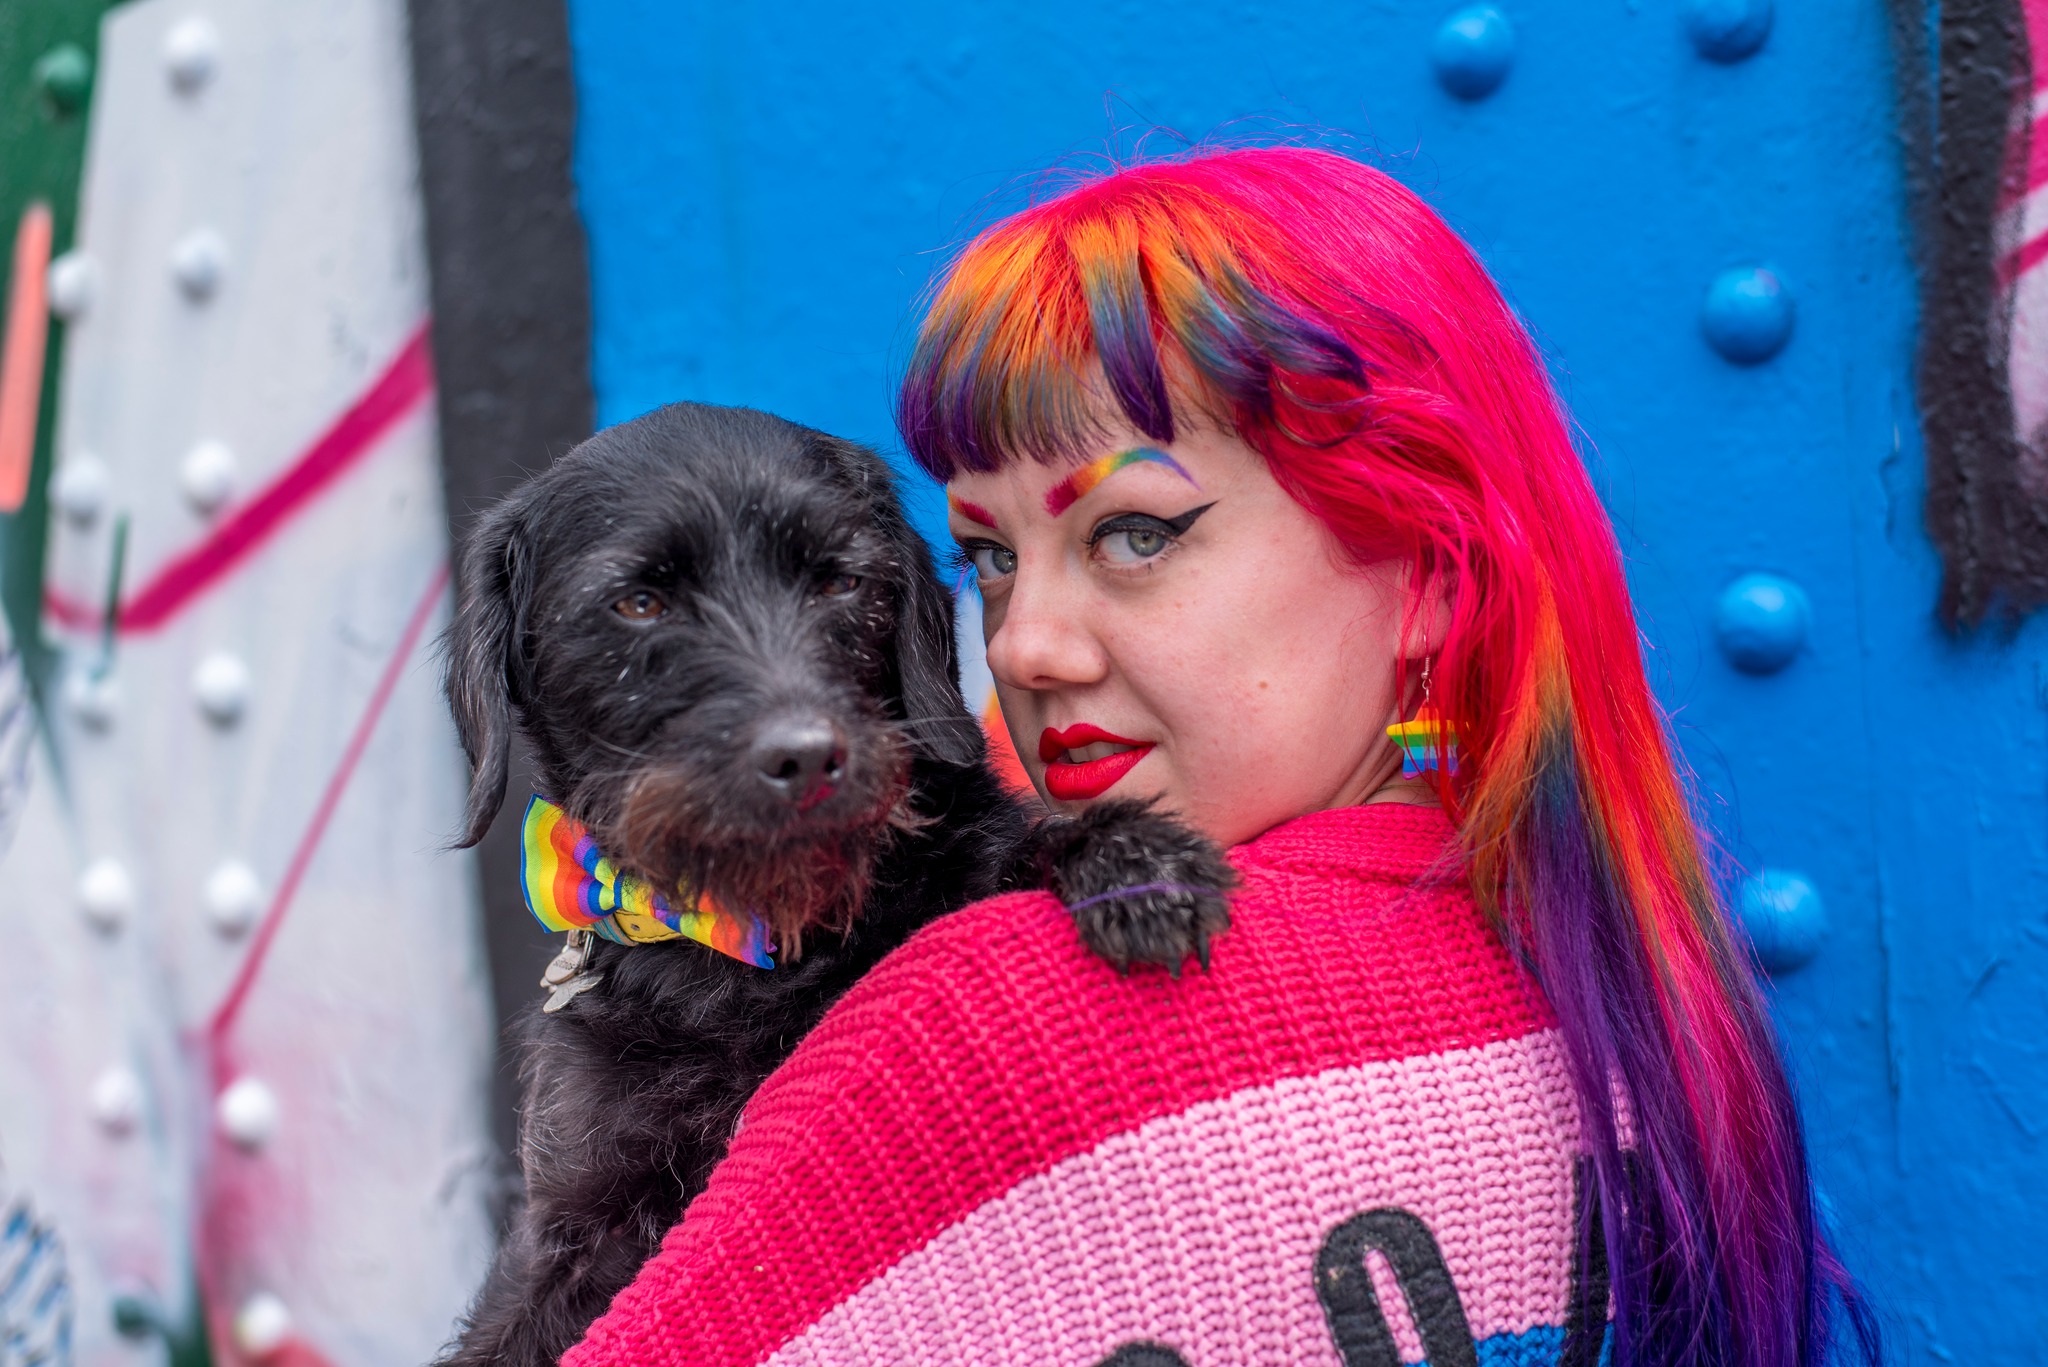 Girl with rainbow hair and cardigan holding a black dog wearing a rainbow bowtie